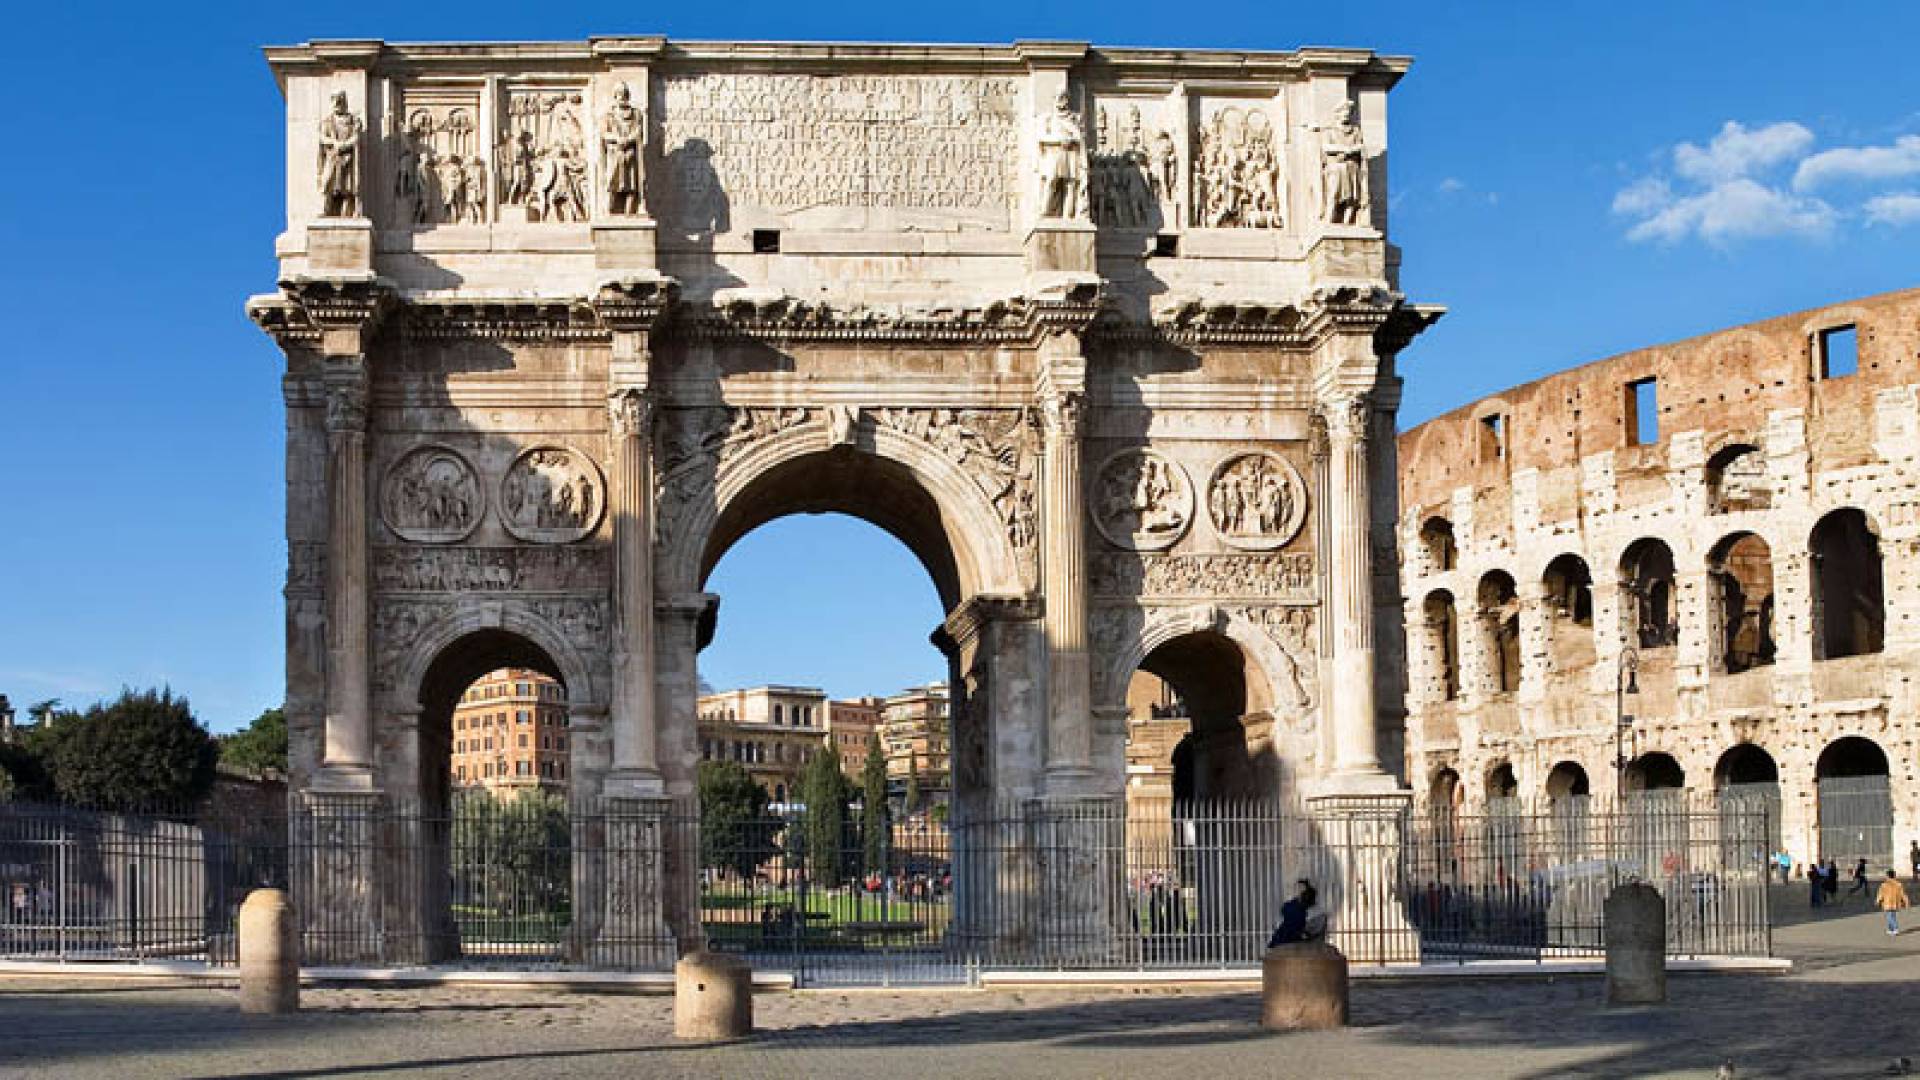 COLOSSEUM, Arch Of Constantine